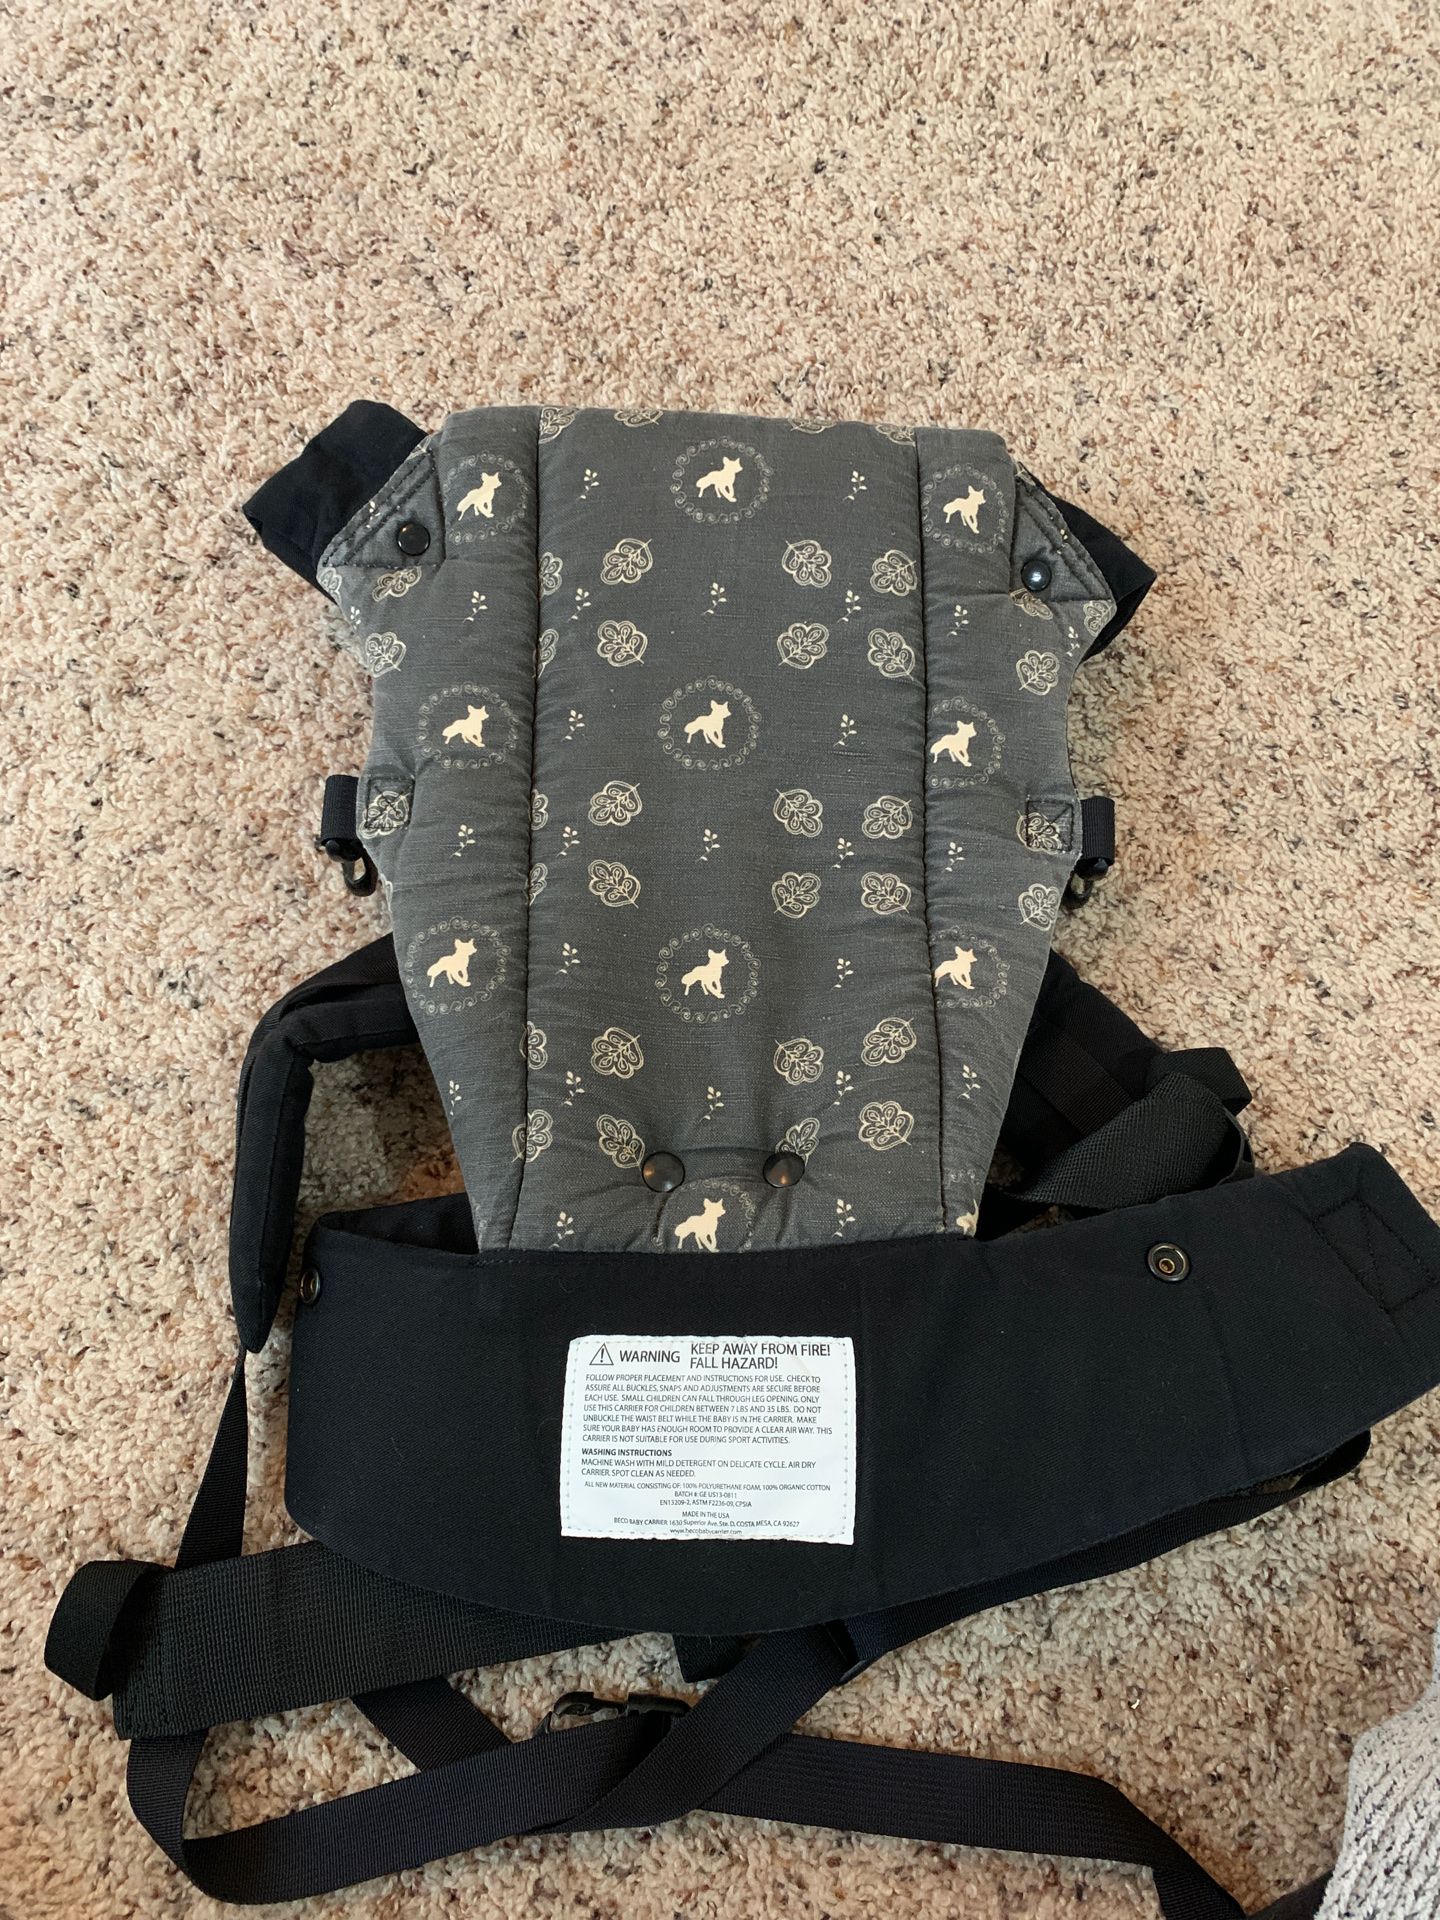 Beco baby carrier